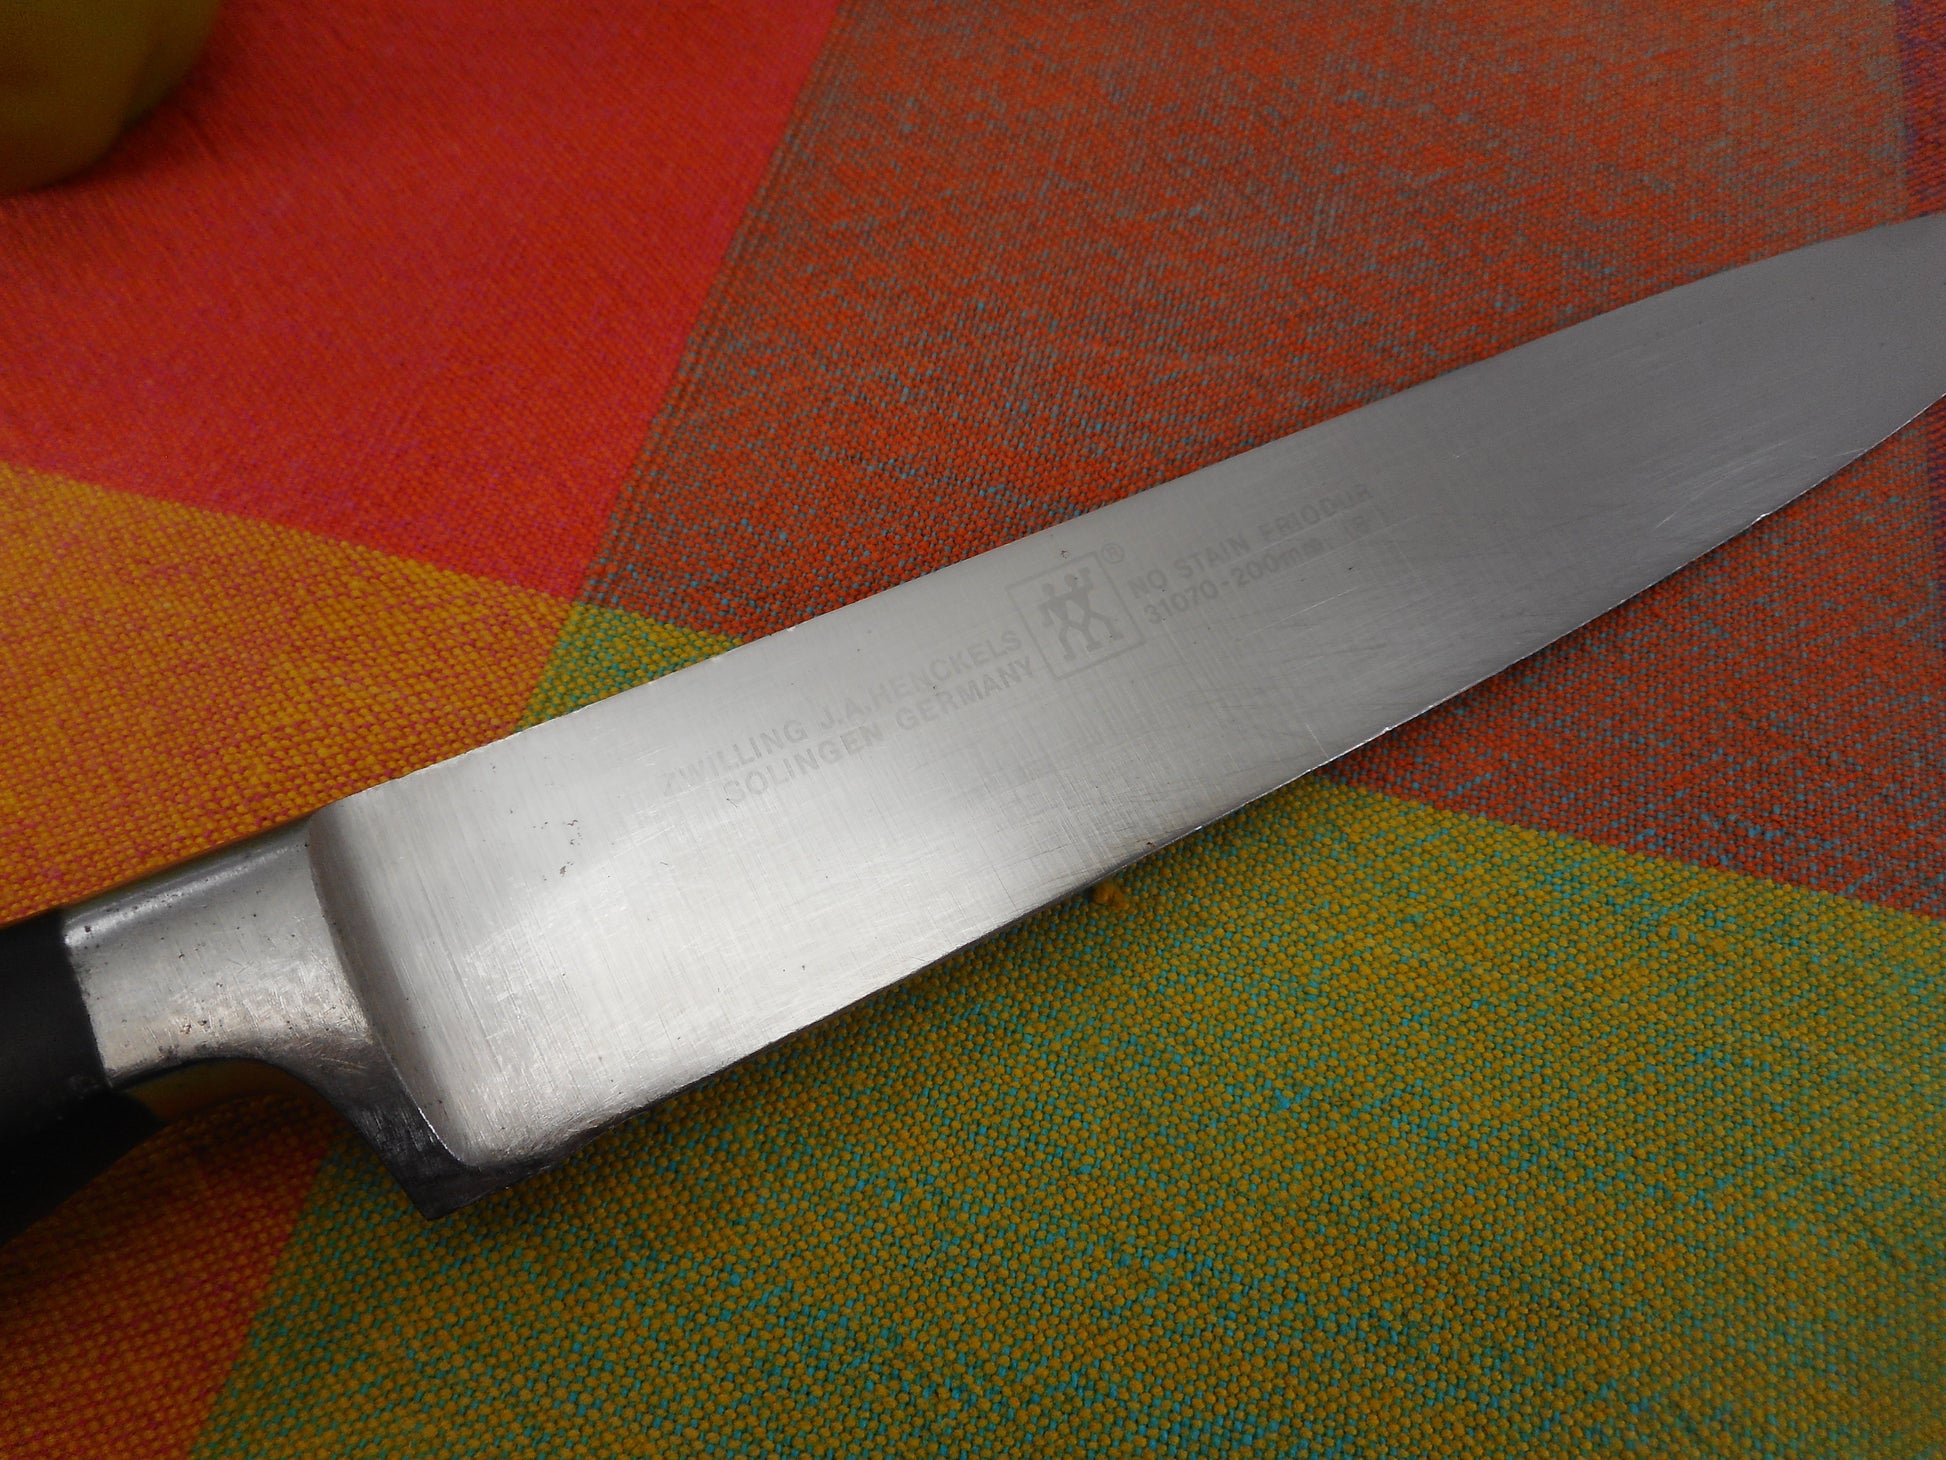 J.A. Henckels Germany 31070-200 mm 8" Stainless Carving Knife Used